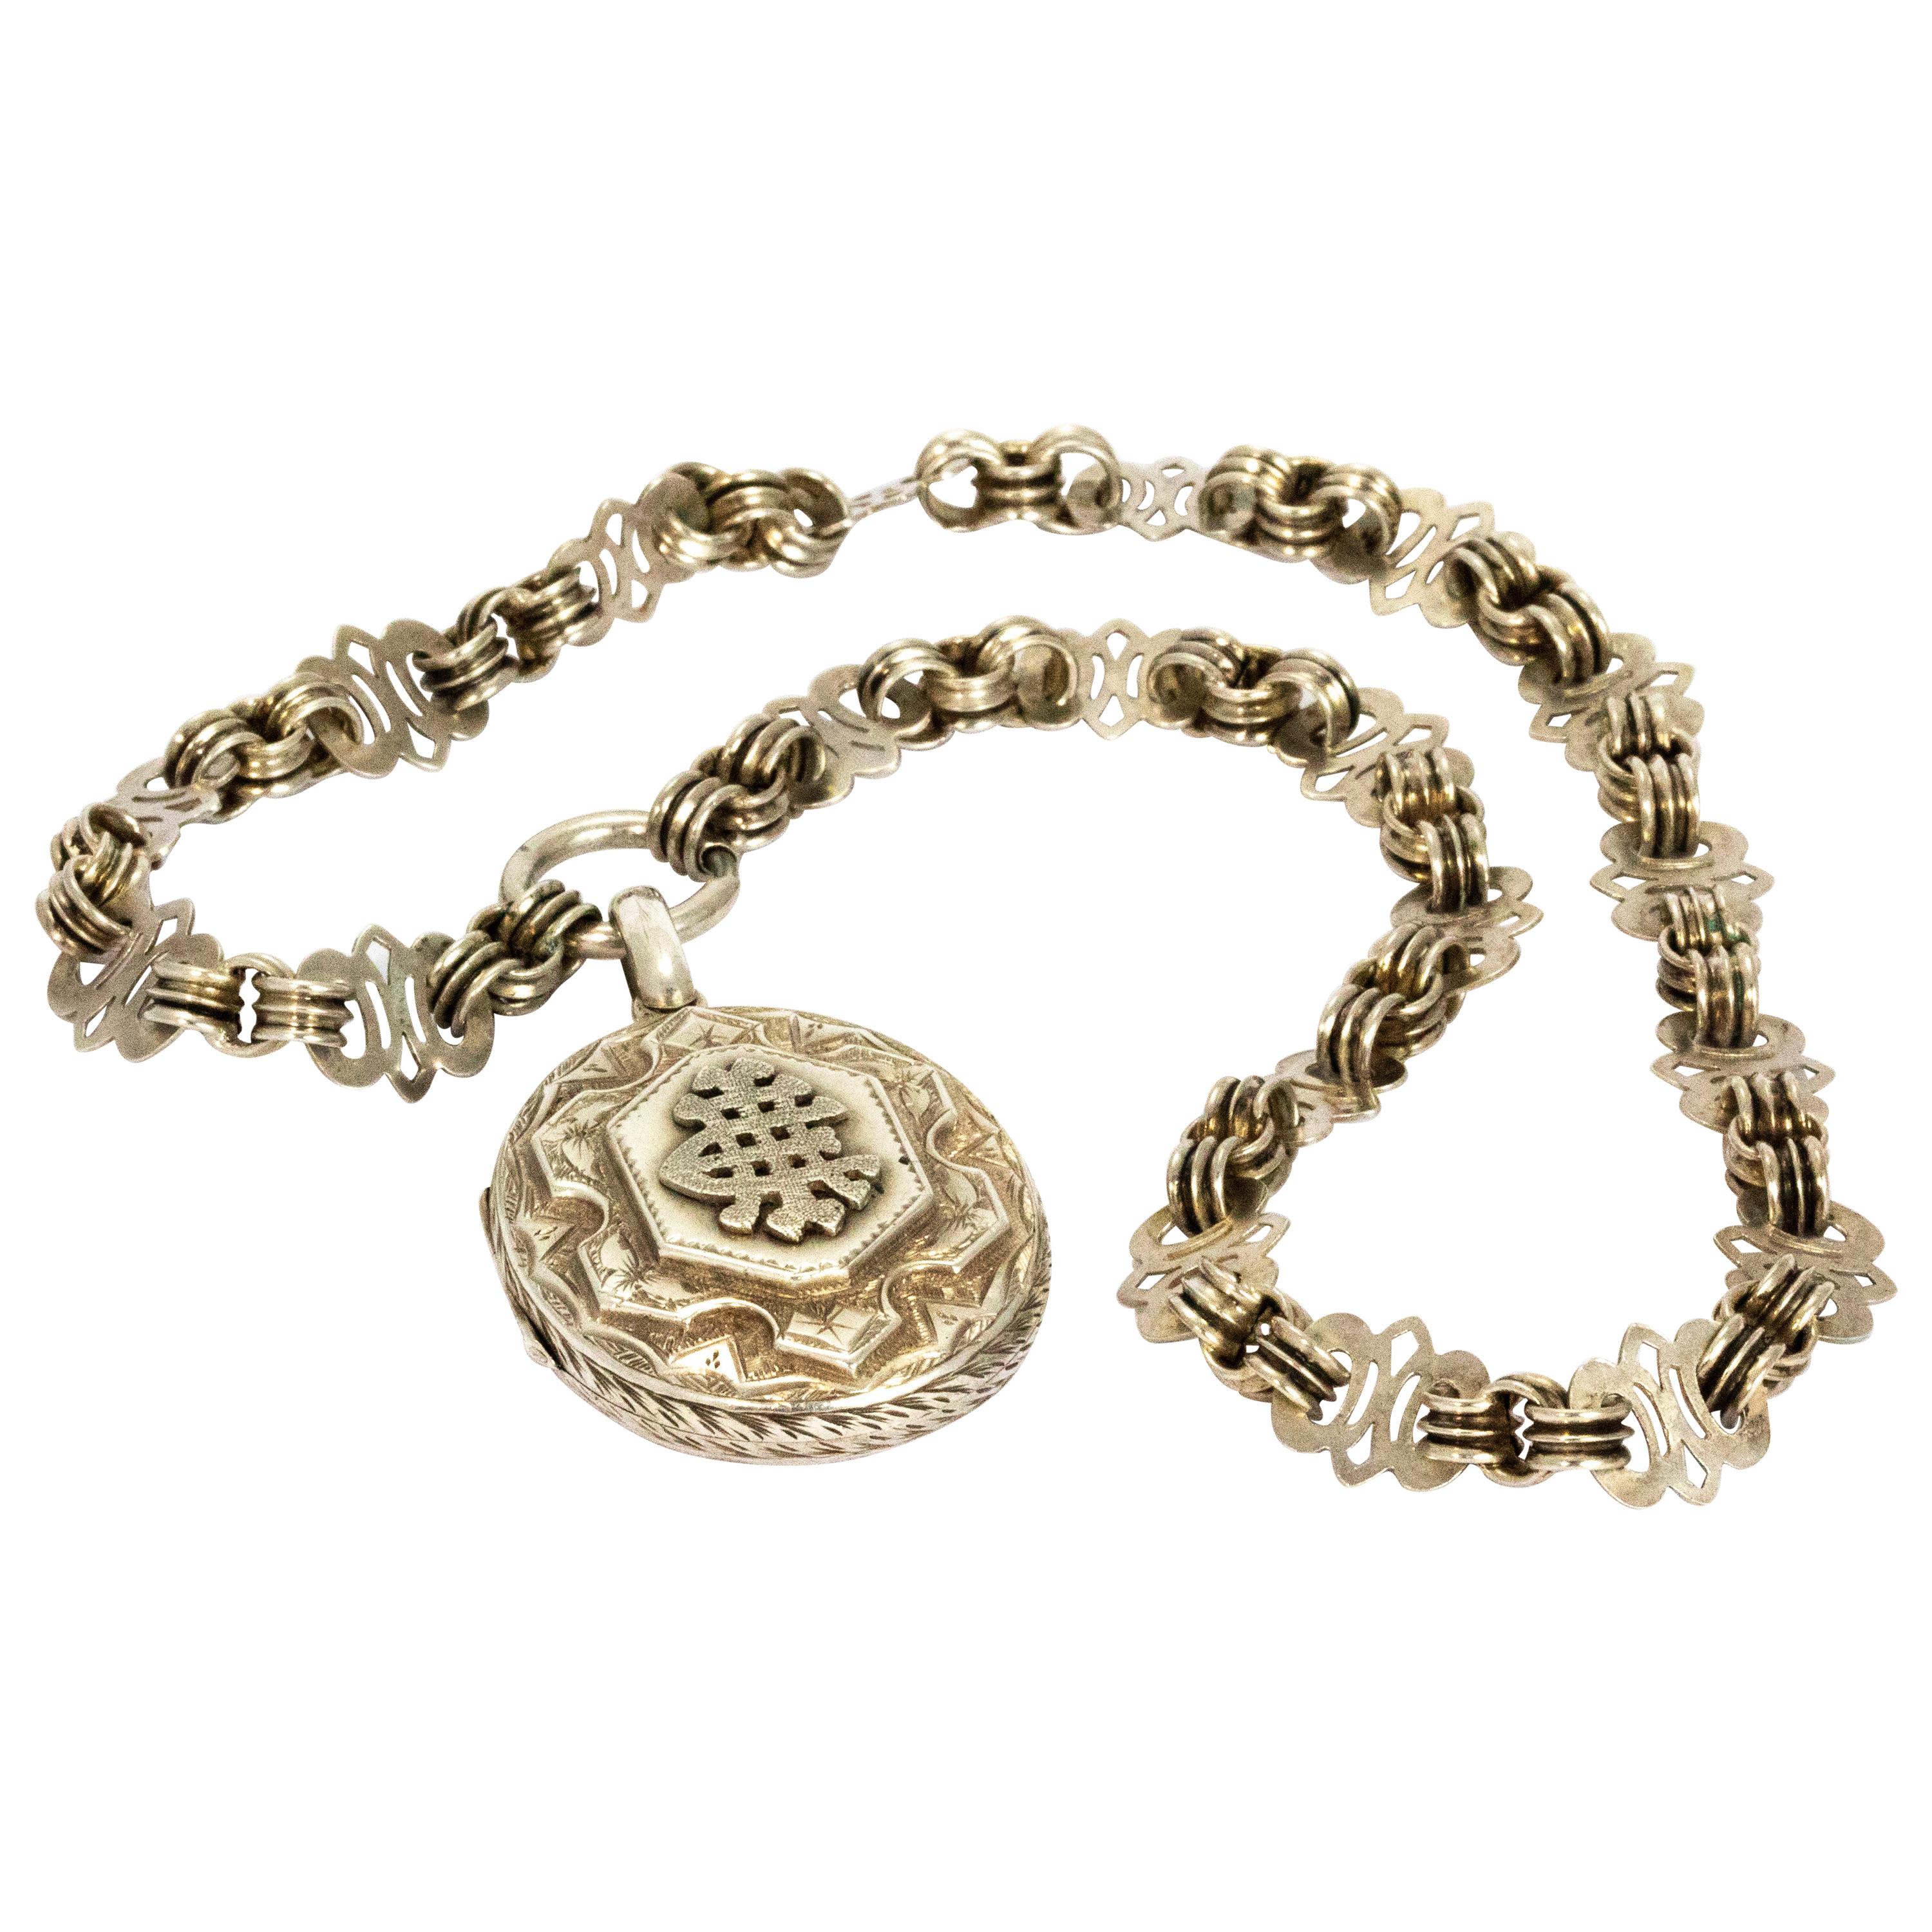 Victorian Silver Ornate Necklace and Locket